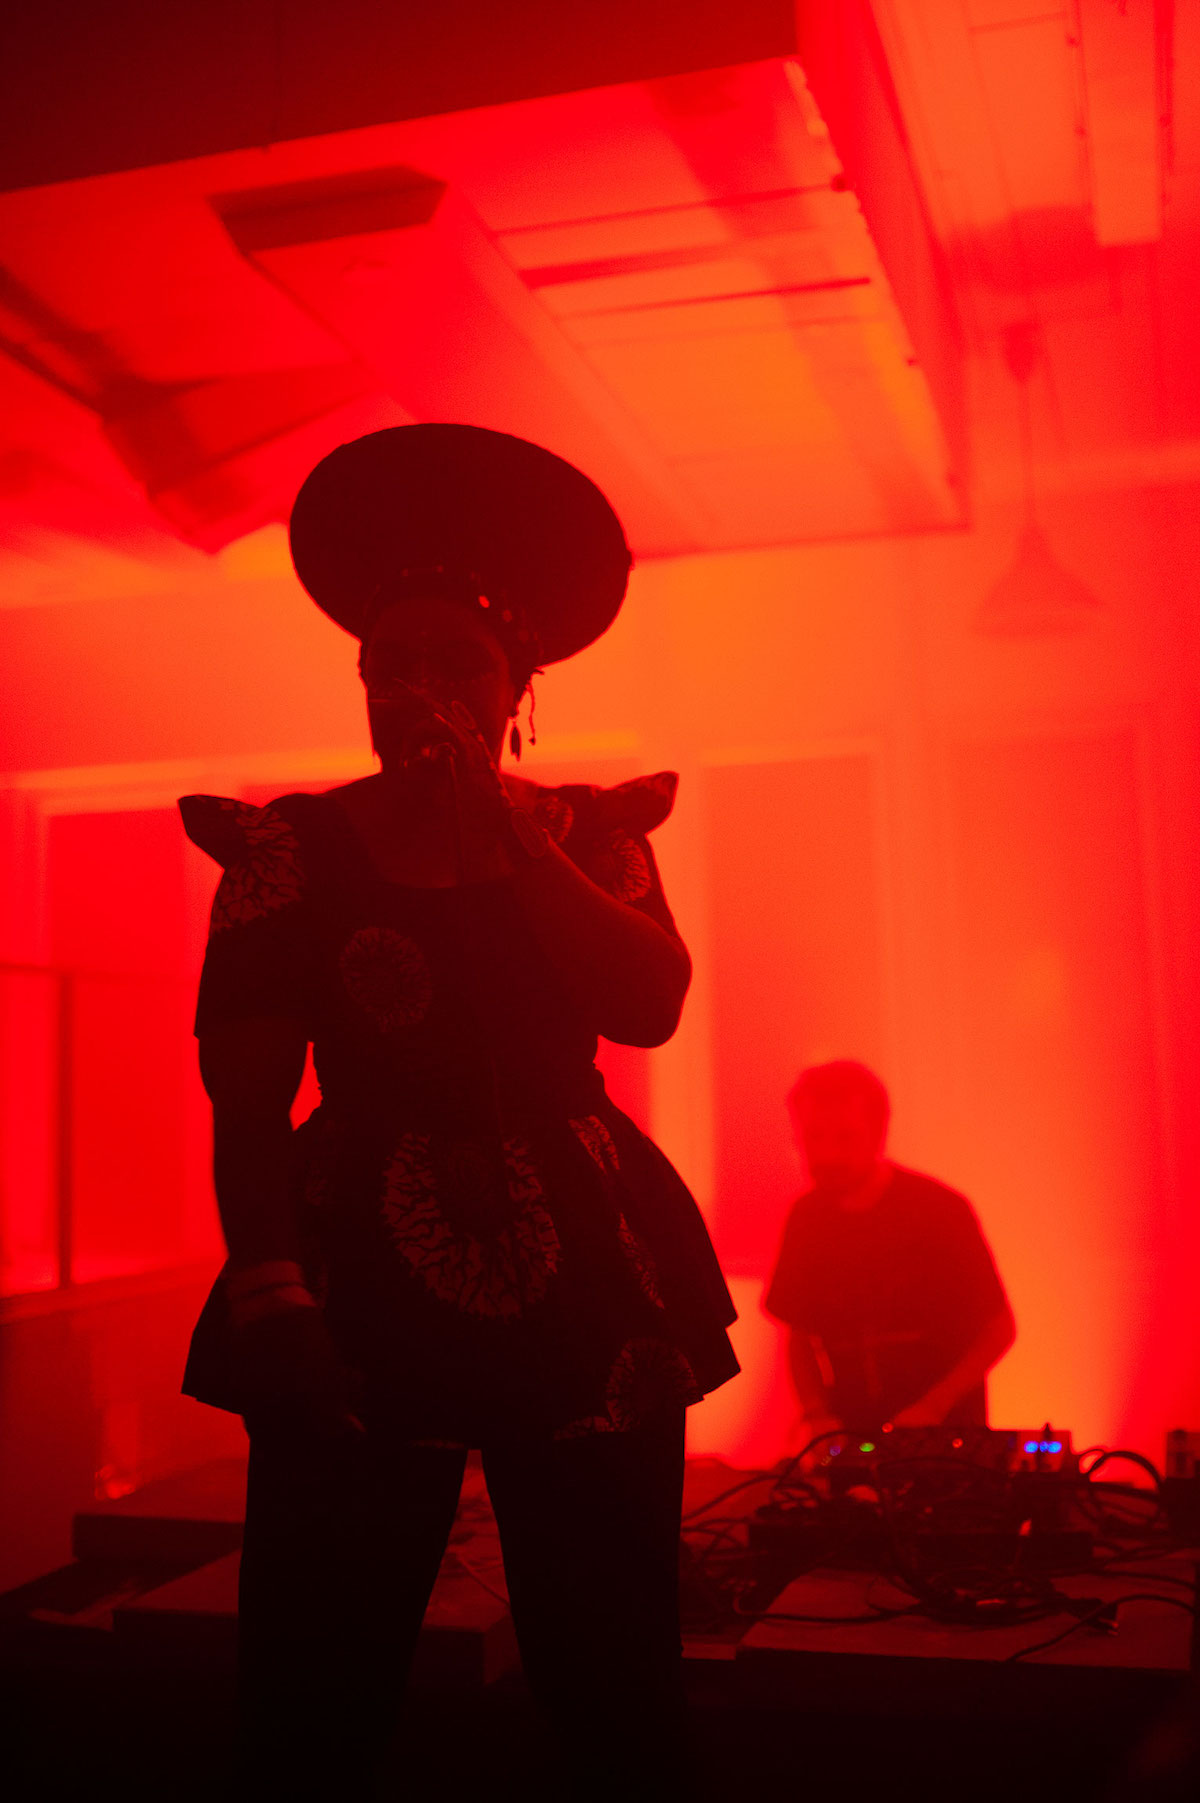 A performance situation with MC Yallah. She is standing in front of a mixing desk with many cables, a man can be glimpsed in the background. The stage behind her is illuminated by red light, which does not shine on MC Yallah. She stands in the dark and is not clearly visible. She wears what is called a Zulu hat, which fits tightly to her head and slopes upwards to finish in a large circle. She has a short dress with protruding shoulder appliqués and scattered large white flower-like patterns. With her left hand she holds the microphone in front of her mouth.